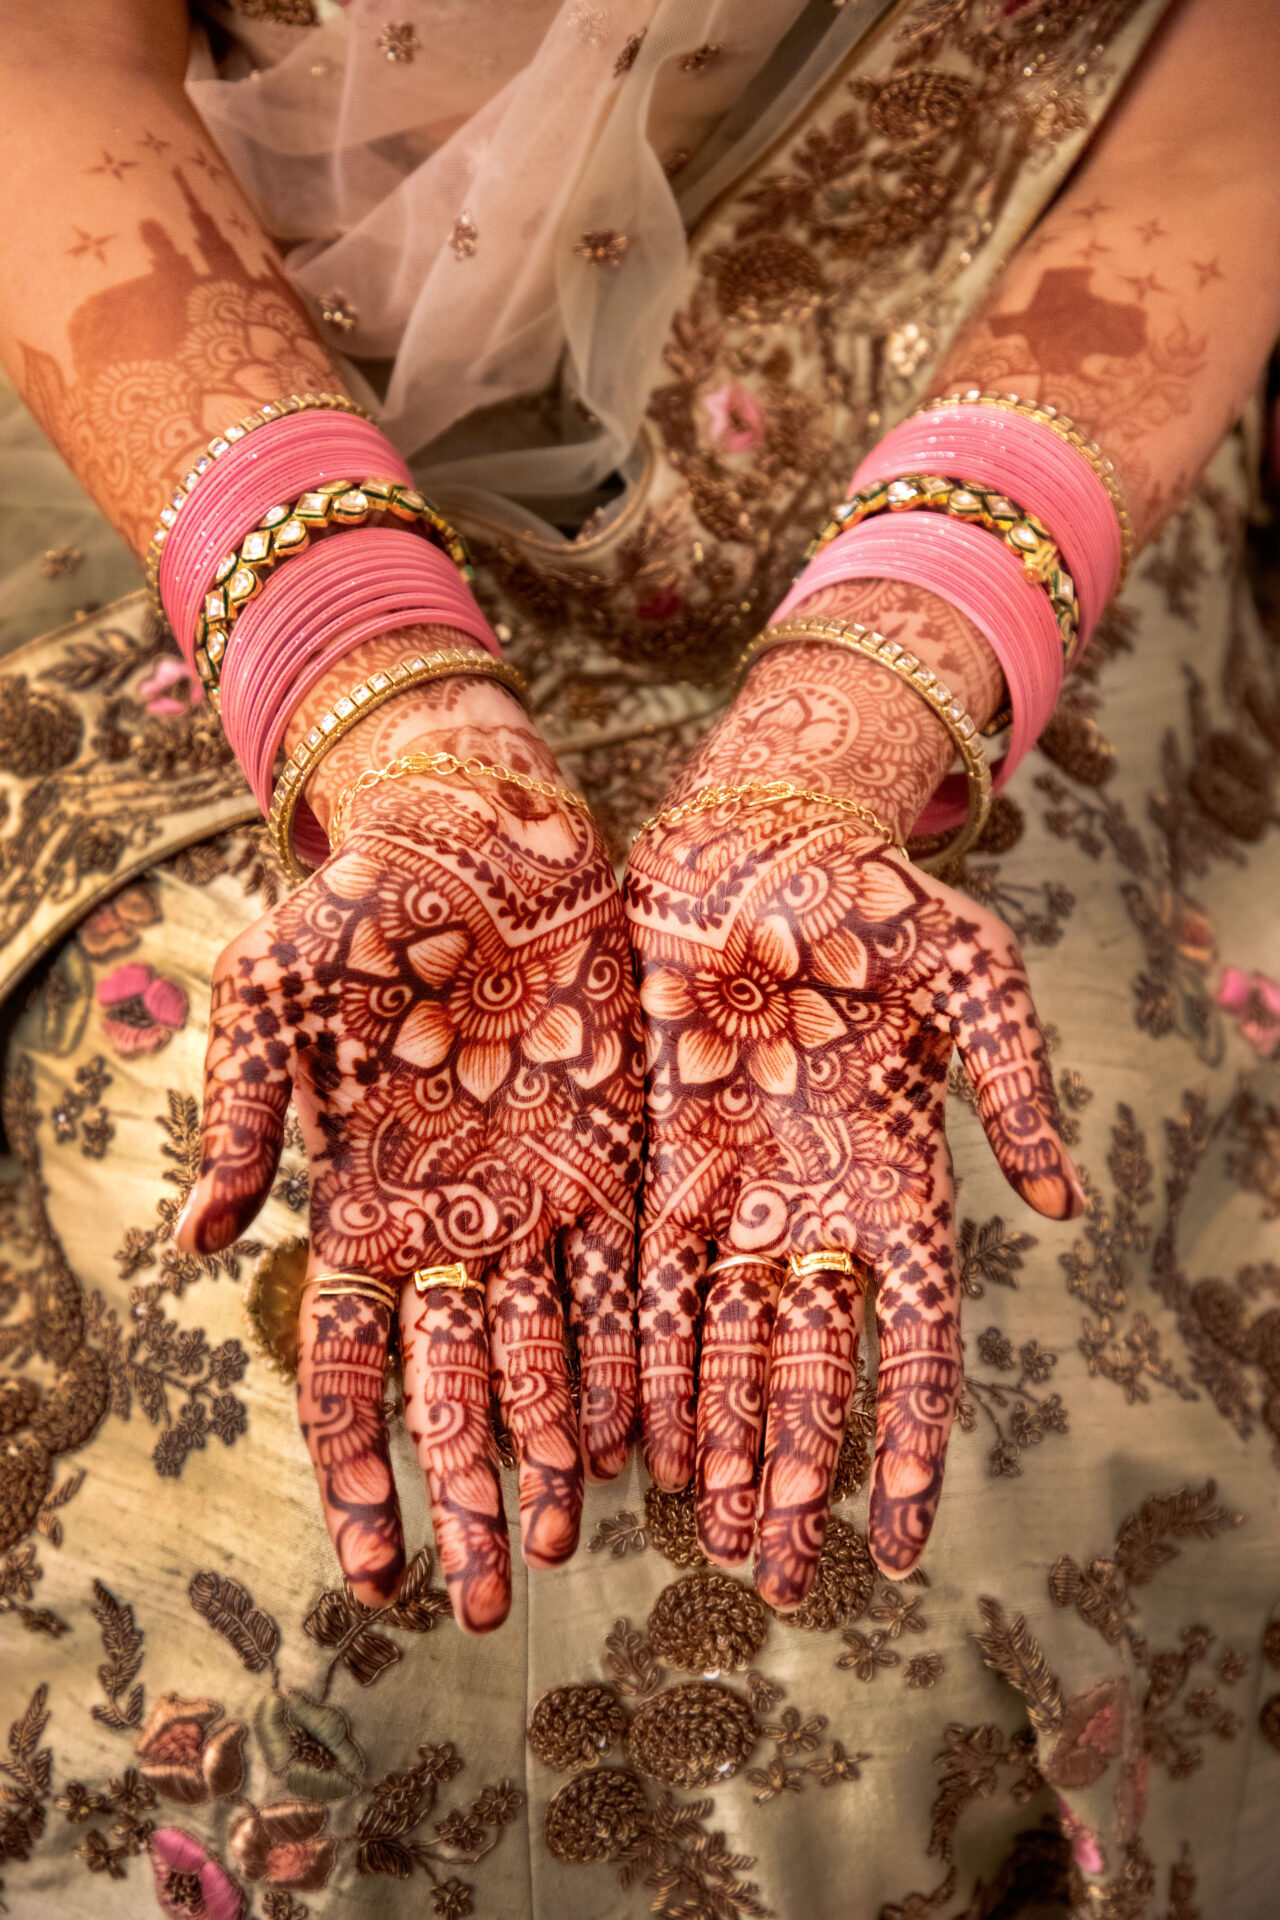 Hands of a South Asian Wedding bride by Astrapia Photography